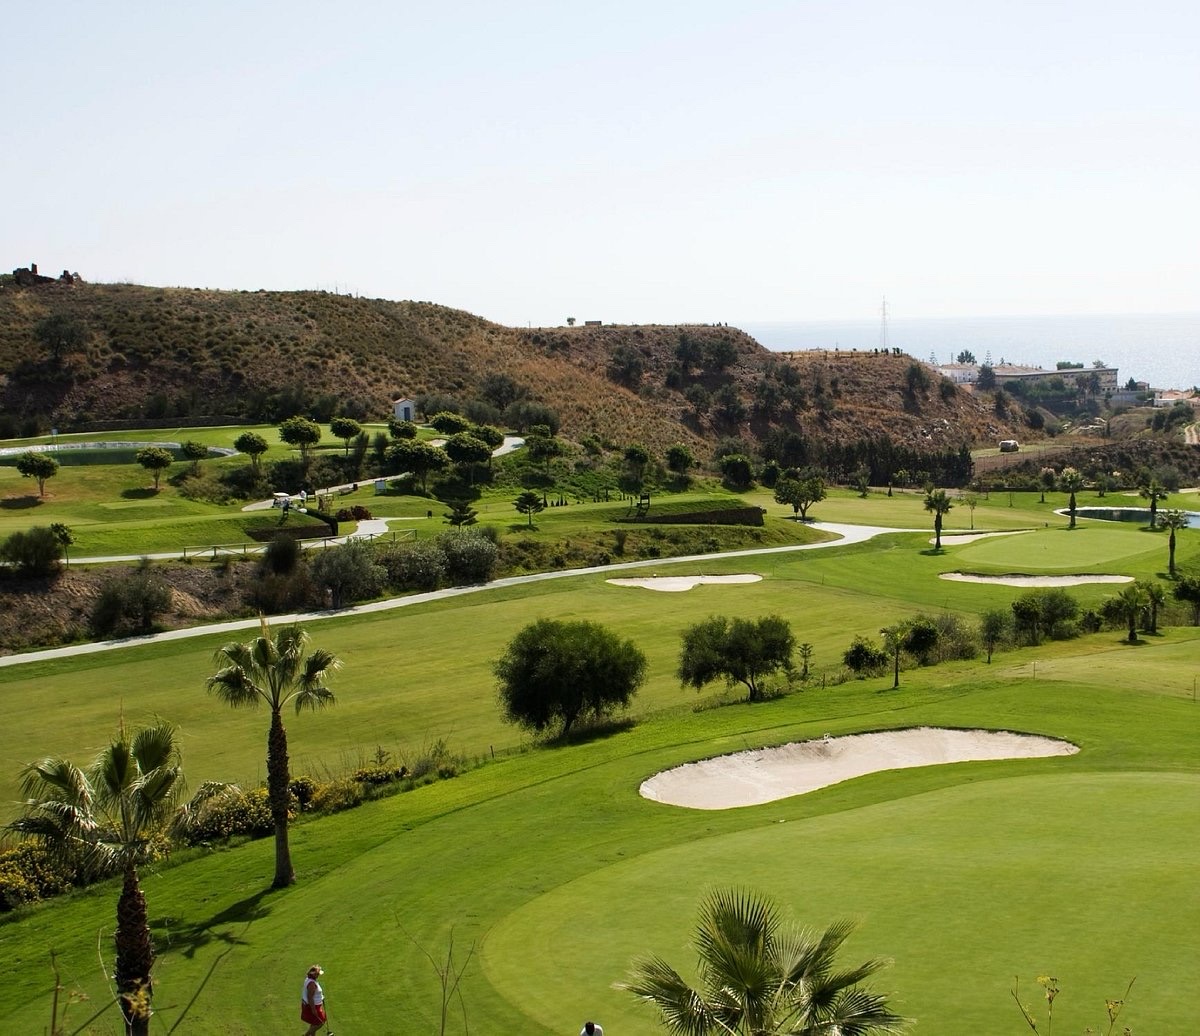 Don't miss out on our amazing East Malaga golf deal! Play Añoreta, Baviera & Antequera Golf from Mar 1 to May 31, 2024, for 212€ pp incl. shared buggies. Book now for discounts! ☀️⛳️ #GolfDeals #MalagaGolf